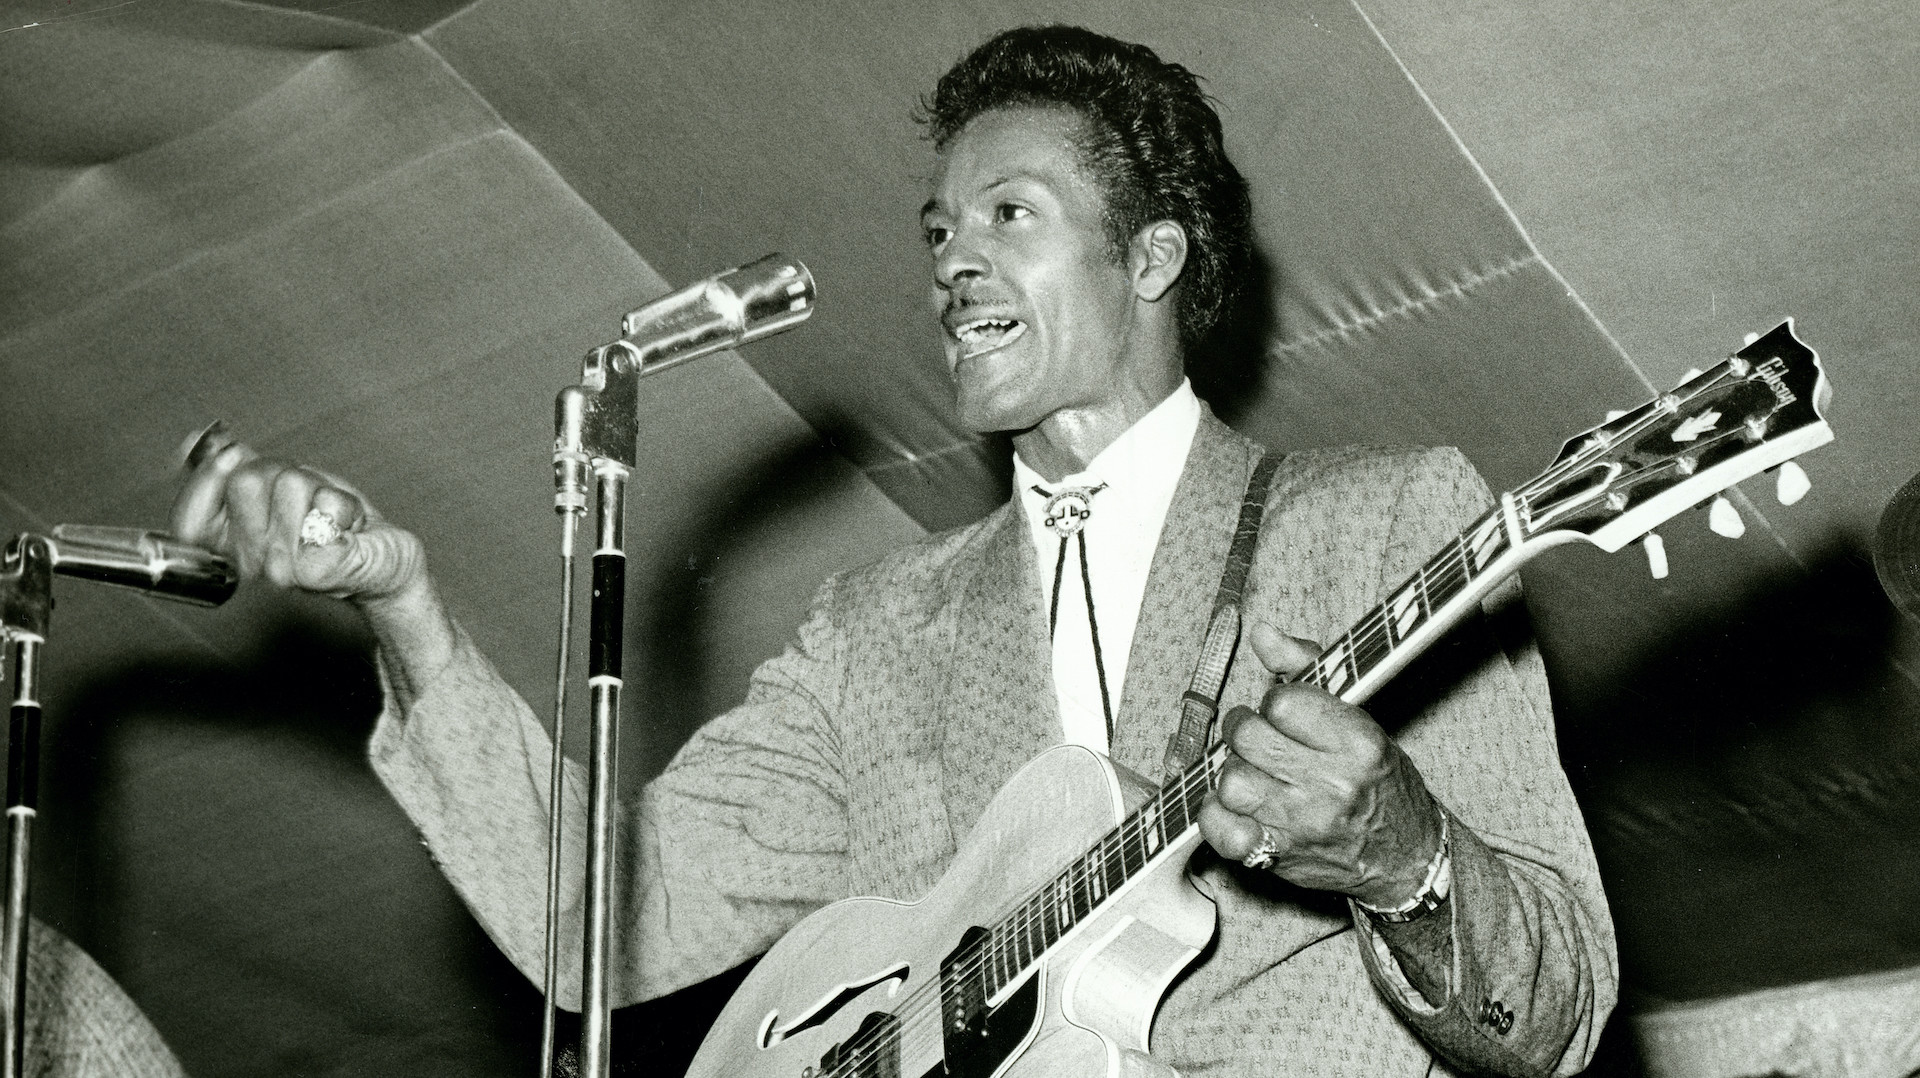 Chuck Berry performing during "Chuck Berry's Bandstand."